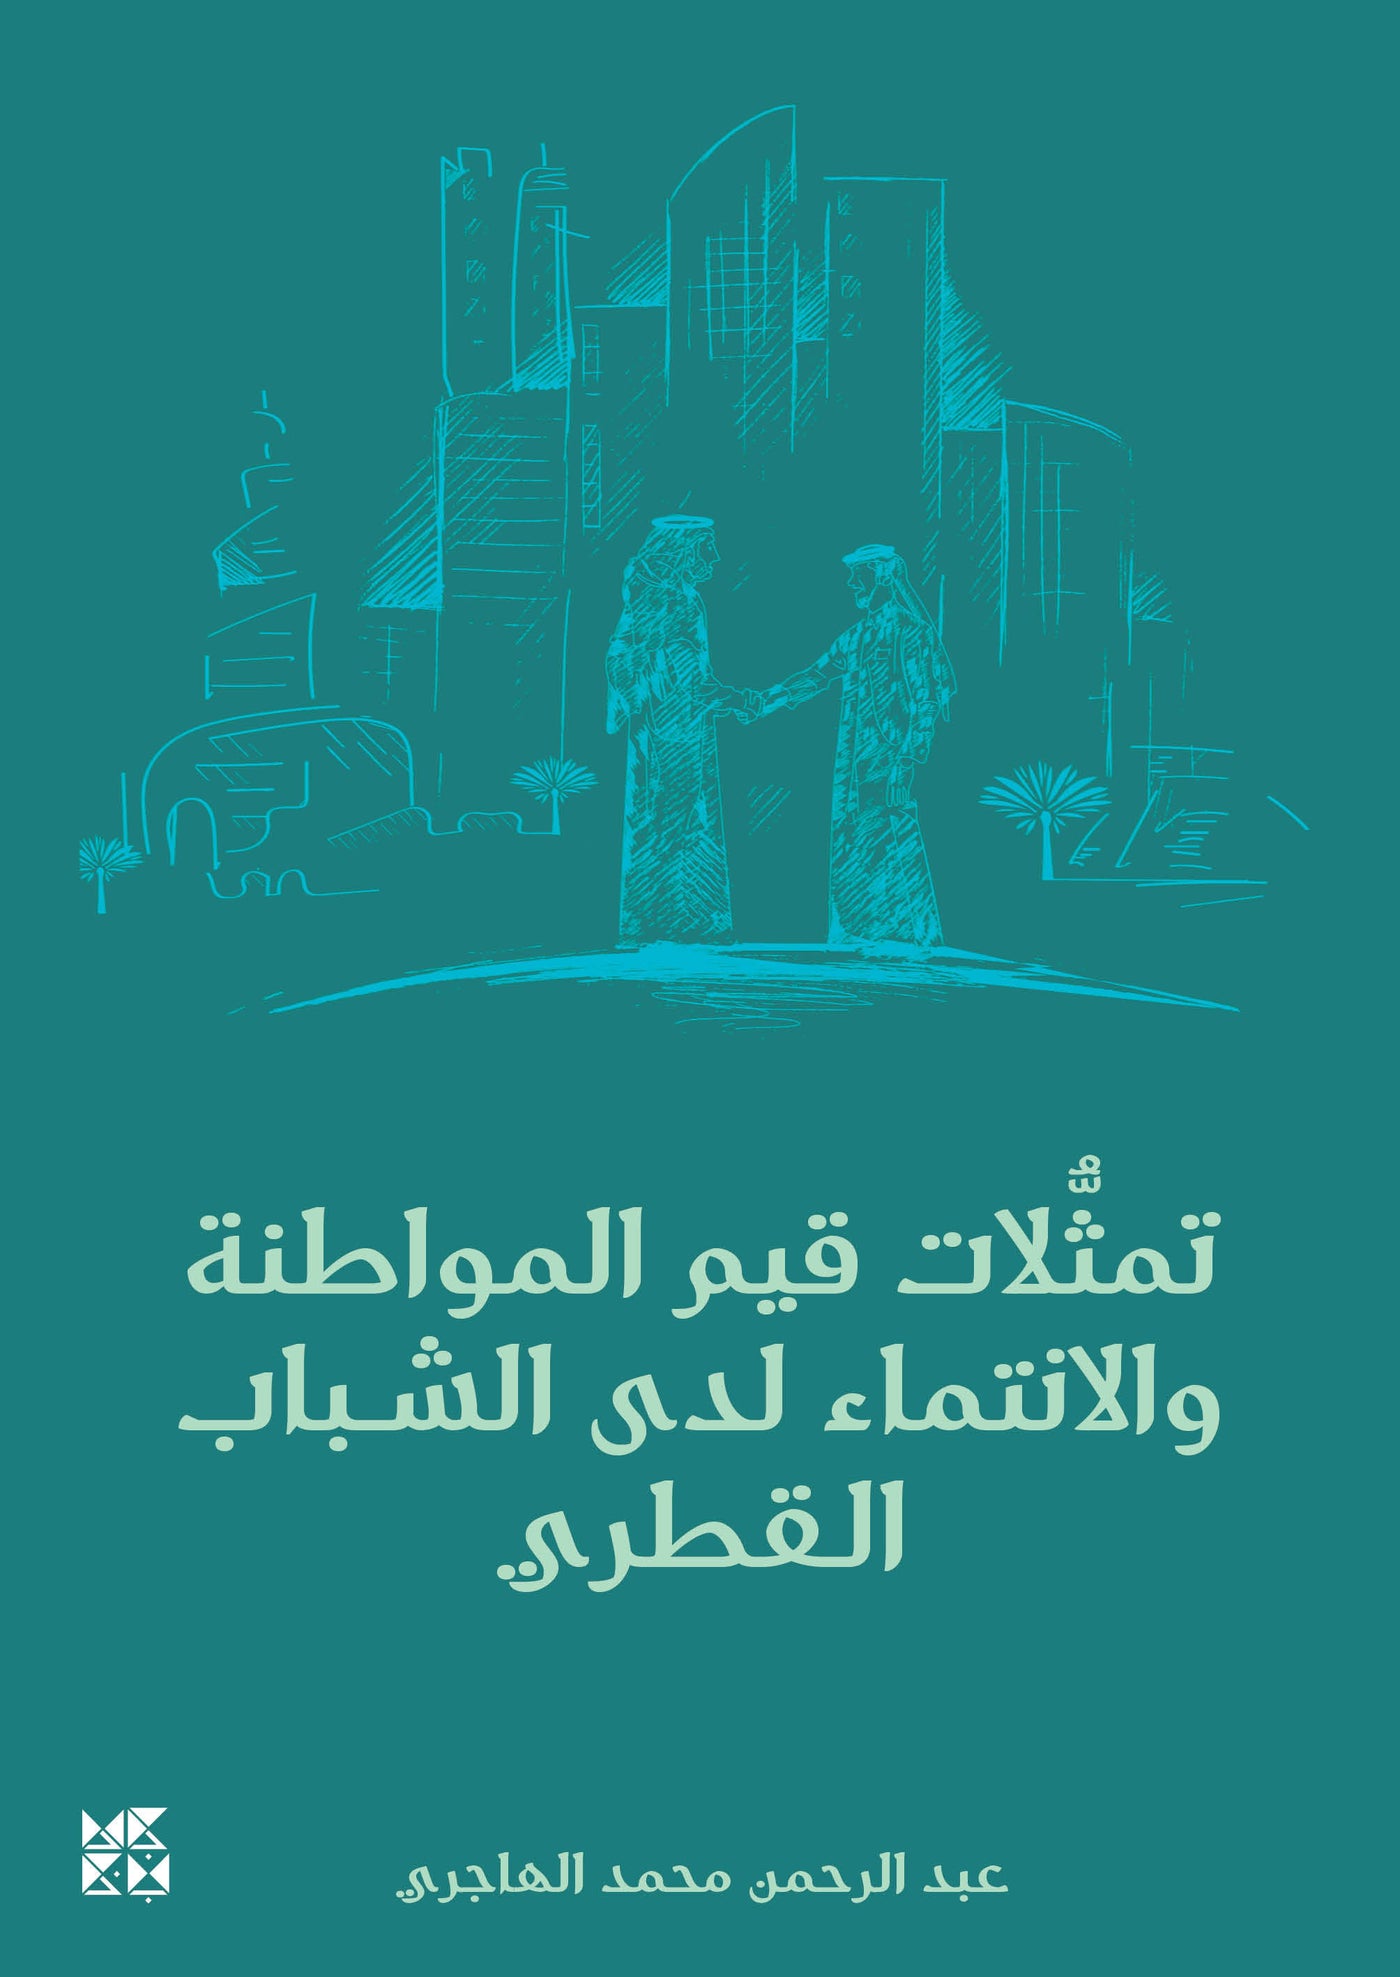 Youth Centers in Qatar - Book Cover